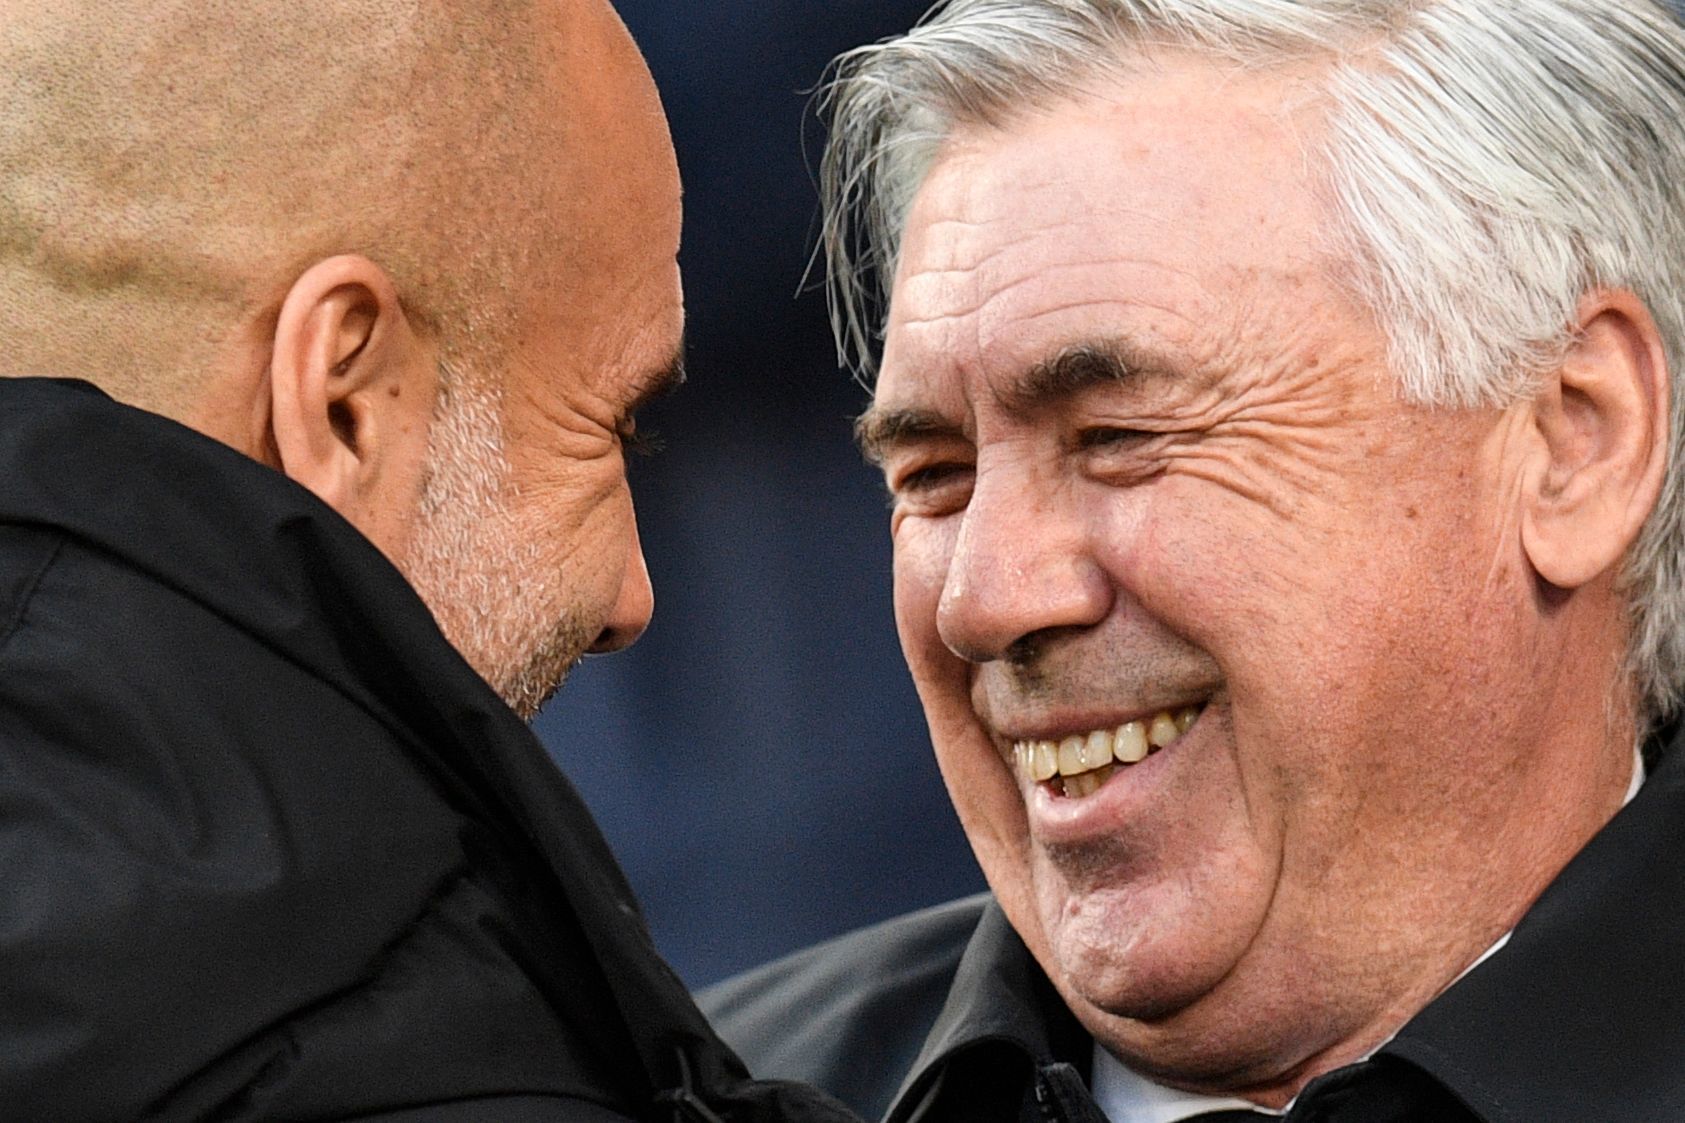 Guardiola and Ancelotti before the game.